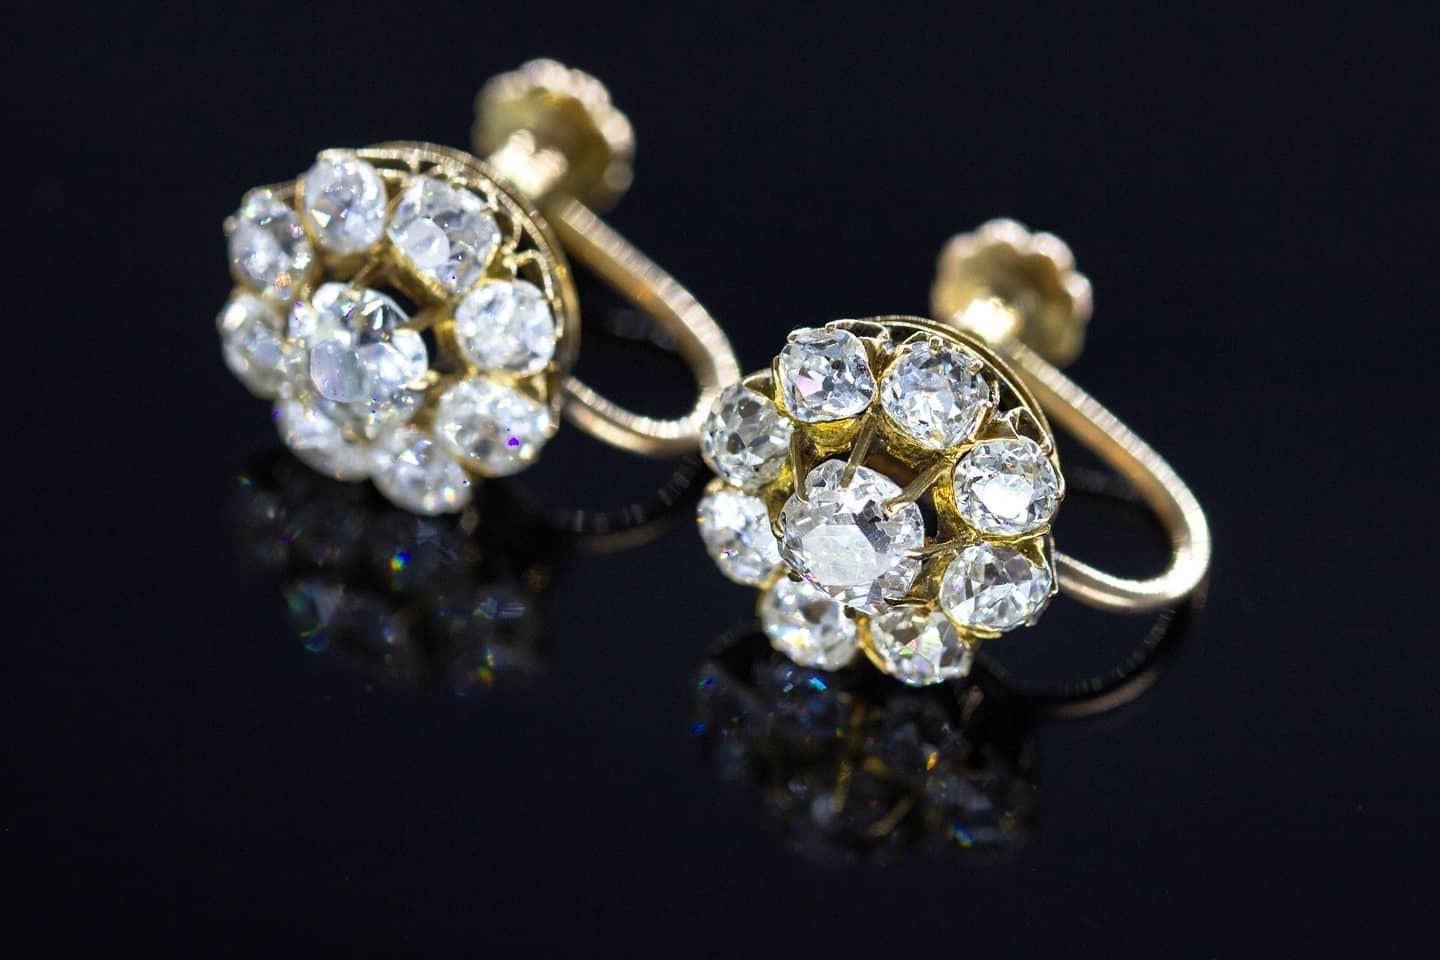 Antique earring in floral shape with old mine cut diamonds centered with 1 larger old mine diamond , flanked with smaller diamonds with estimate total weight of 4 carats H color white excellent spark earrings was made in middle of 20th century (